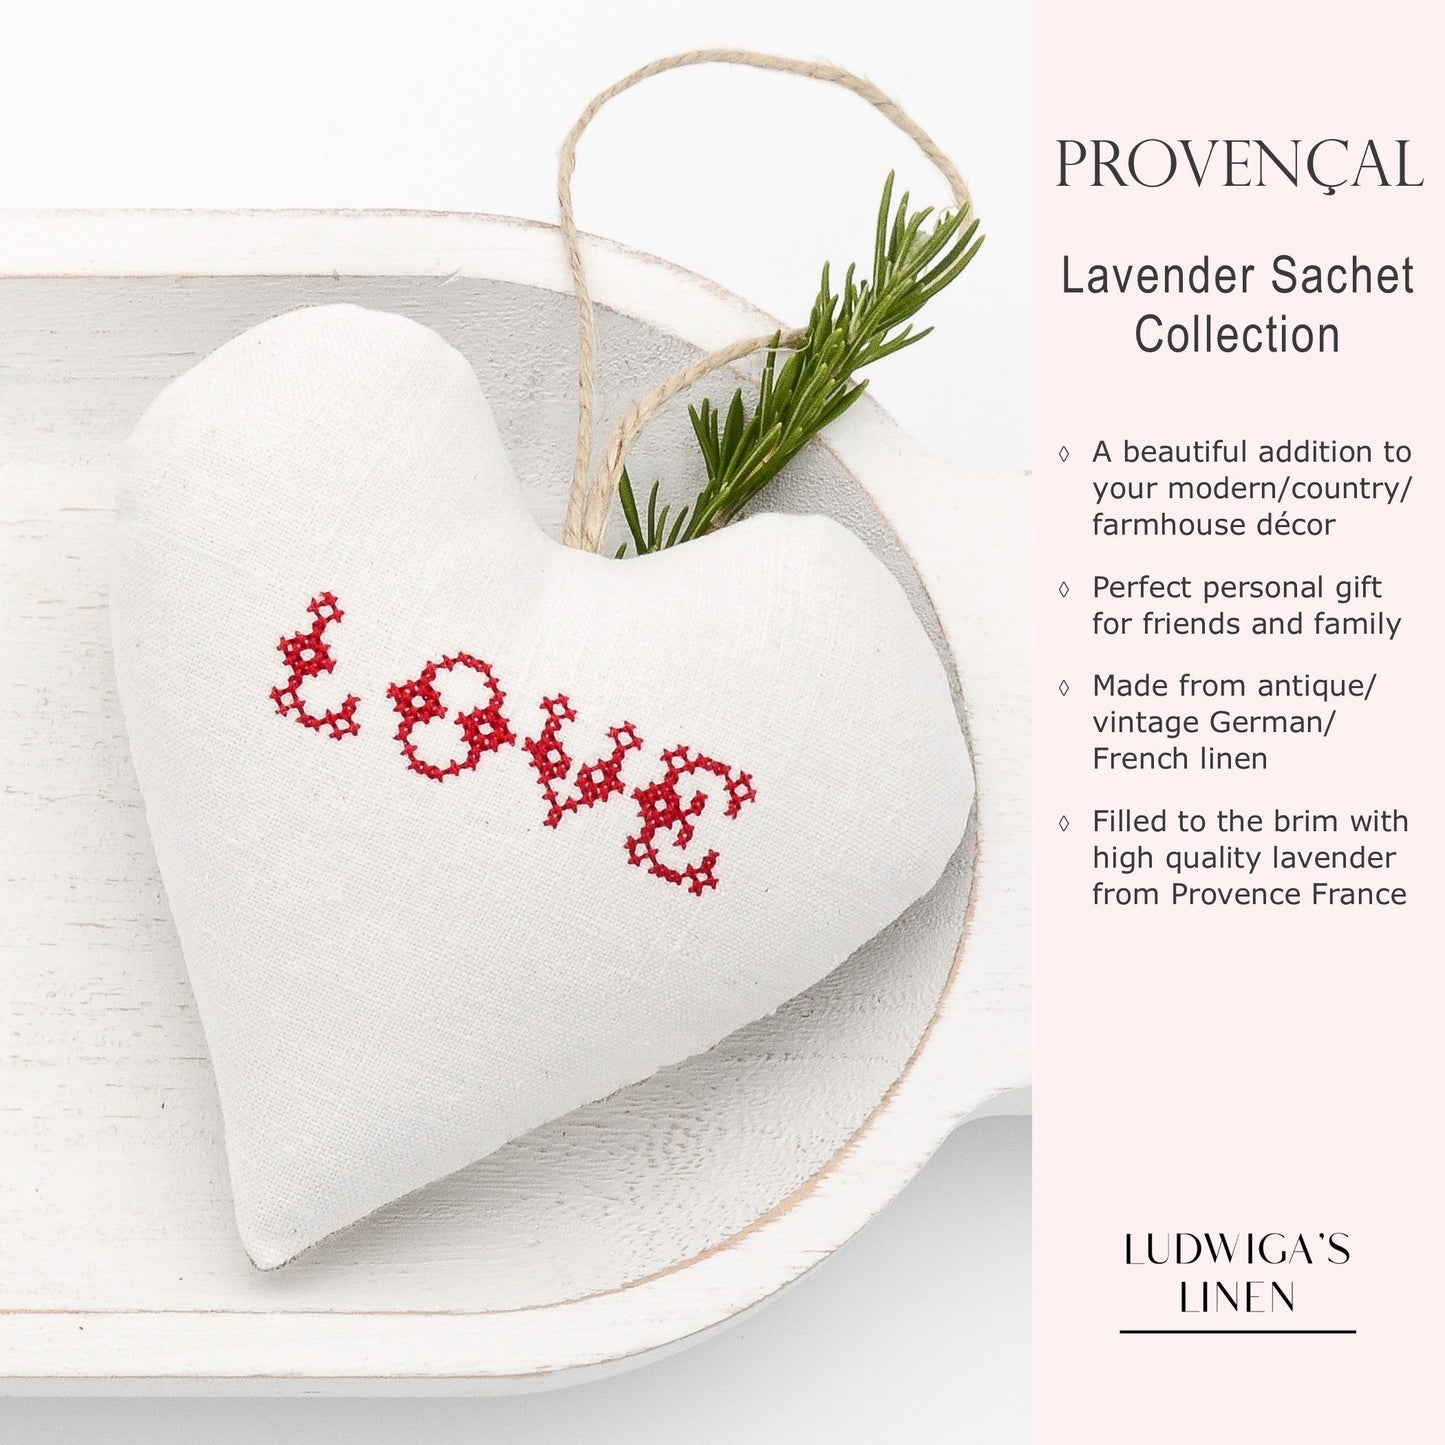 Antique/vintage European white linen lavender sachet heart with "LOVE" embroidered in red, hemp twine tie and filled with high quality lavender from Provence France